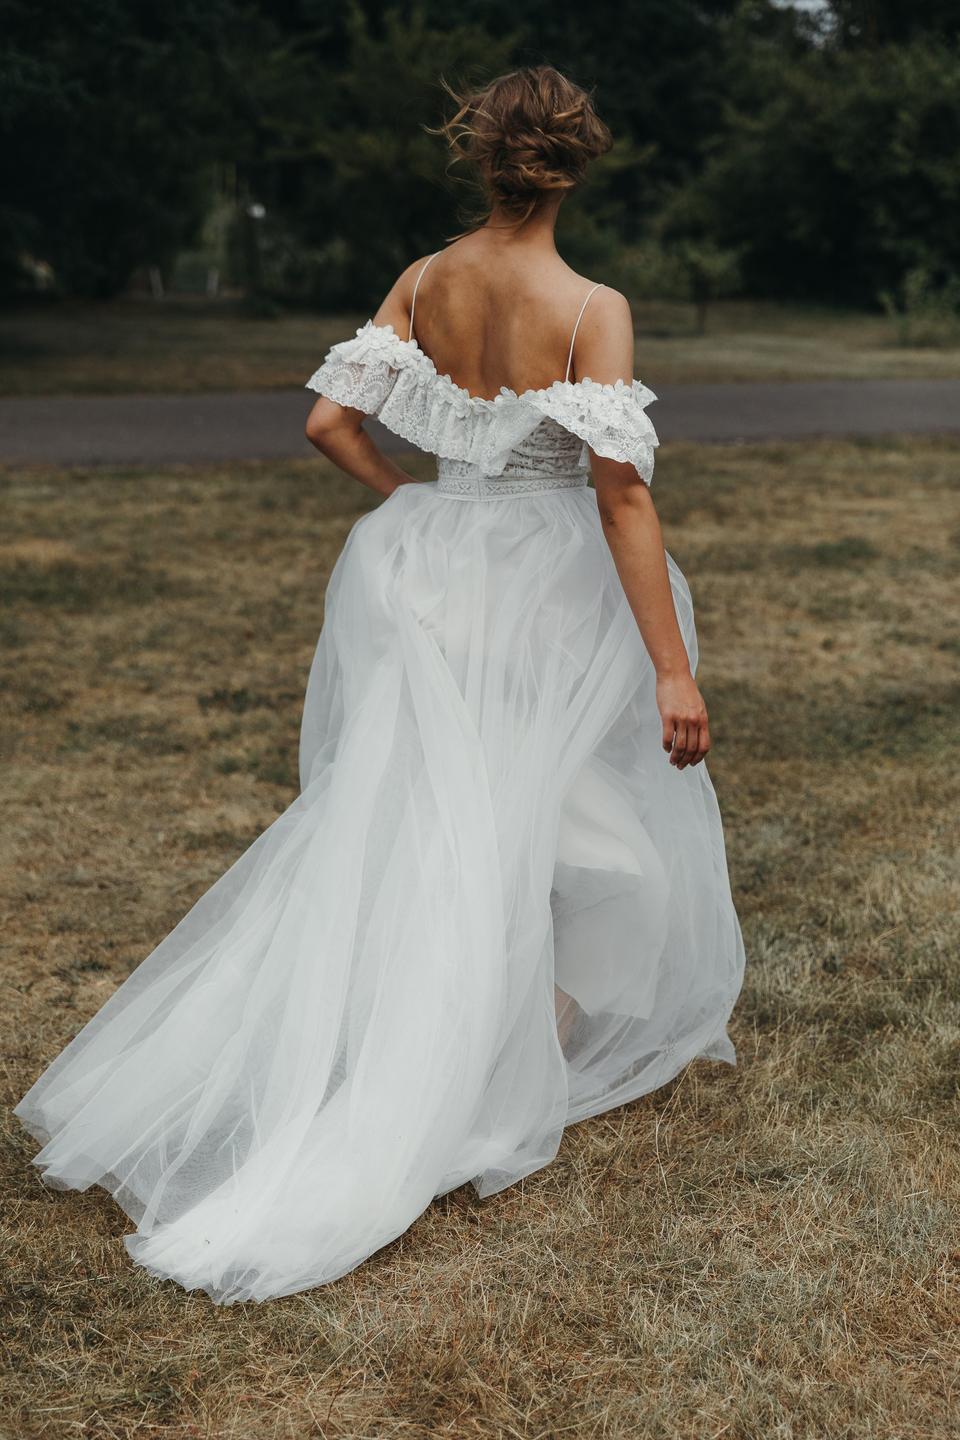 The 27 Best Wedding Dress Shops in London 2022 - hitched.co.uk